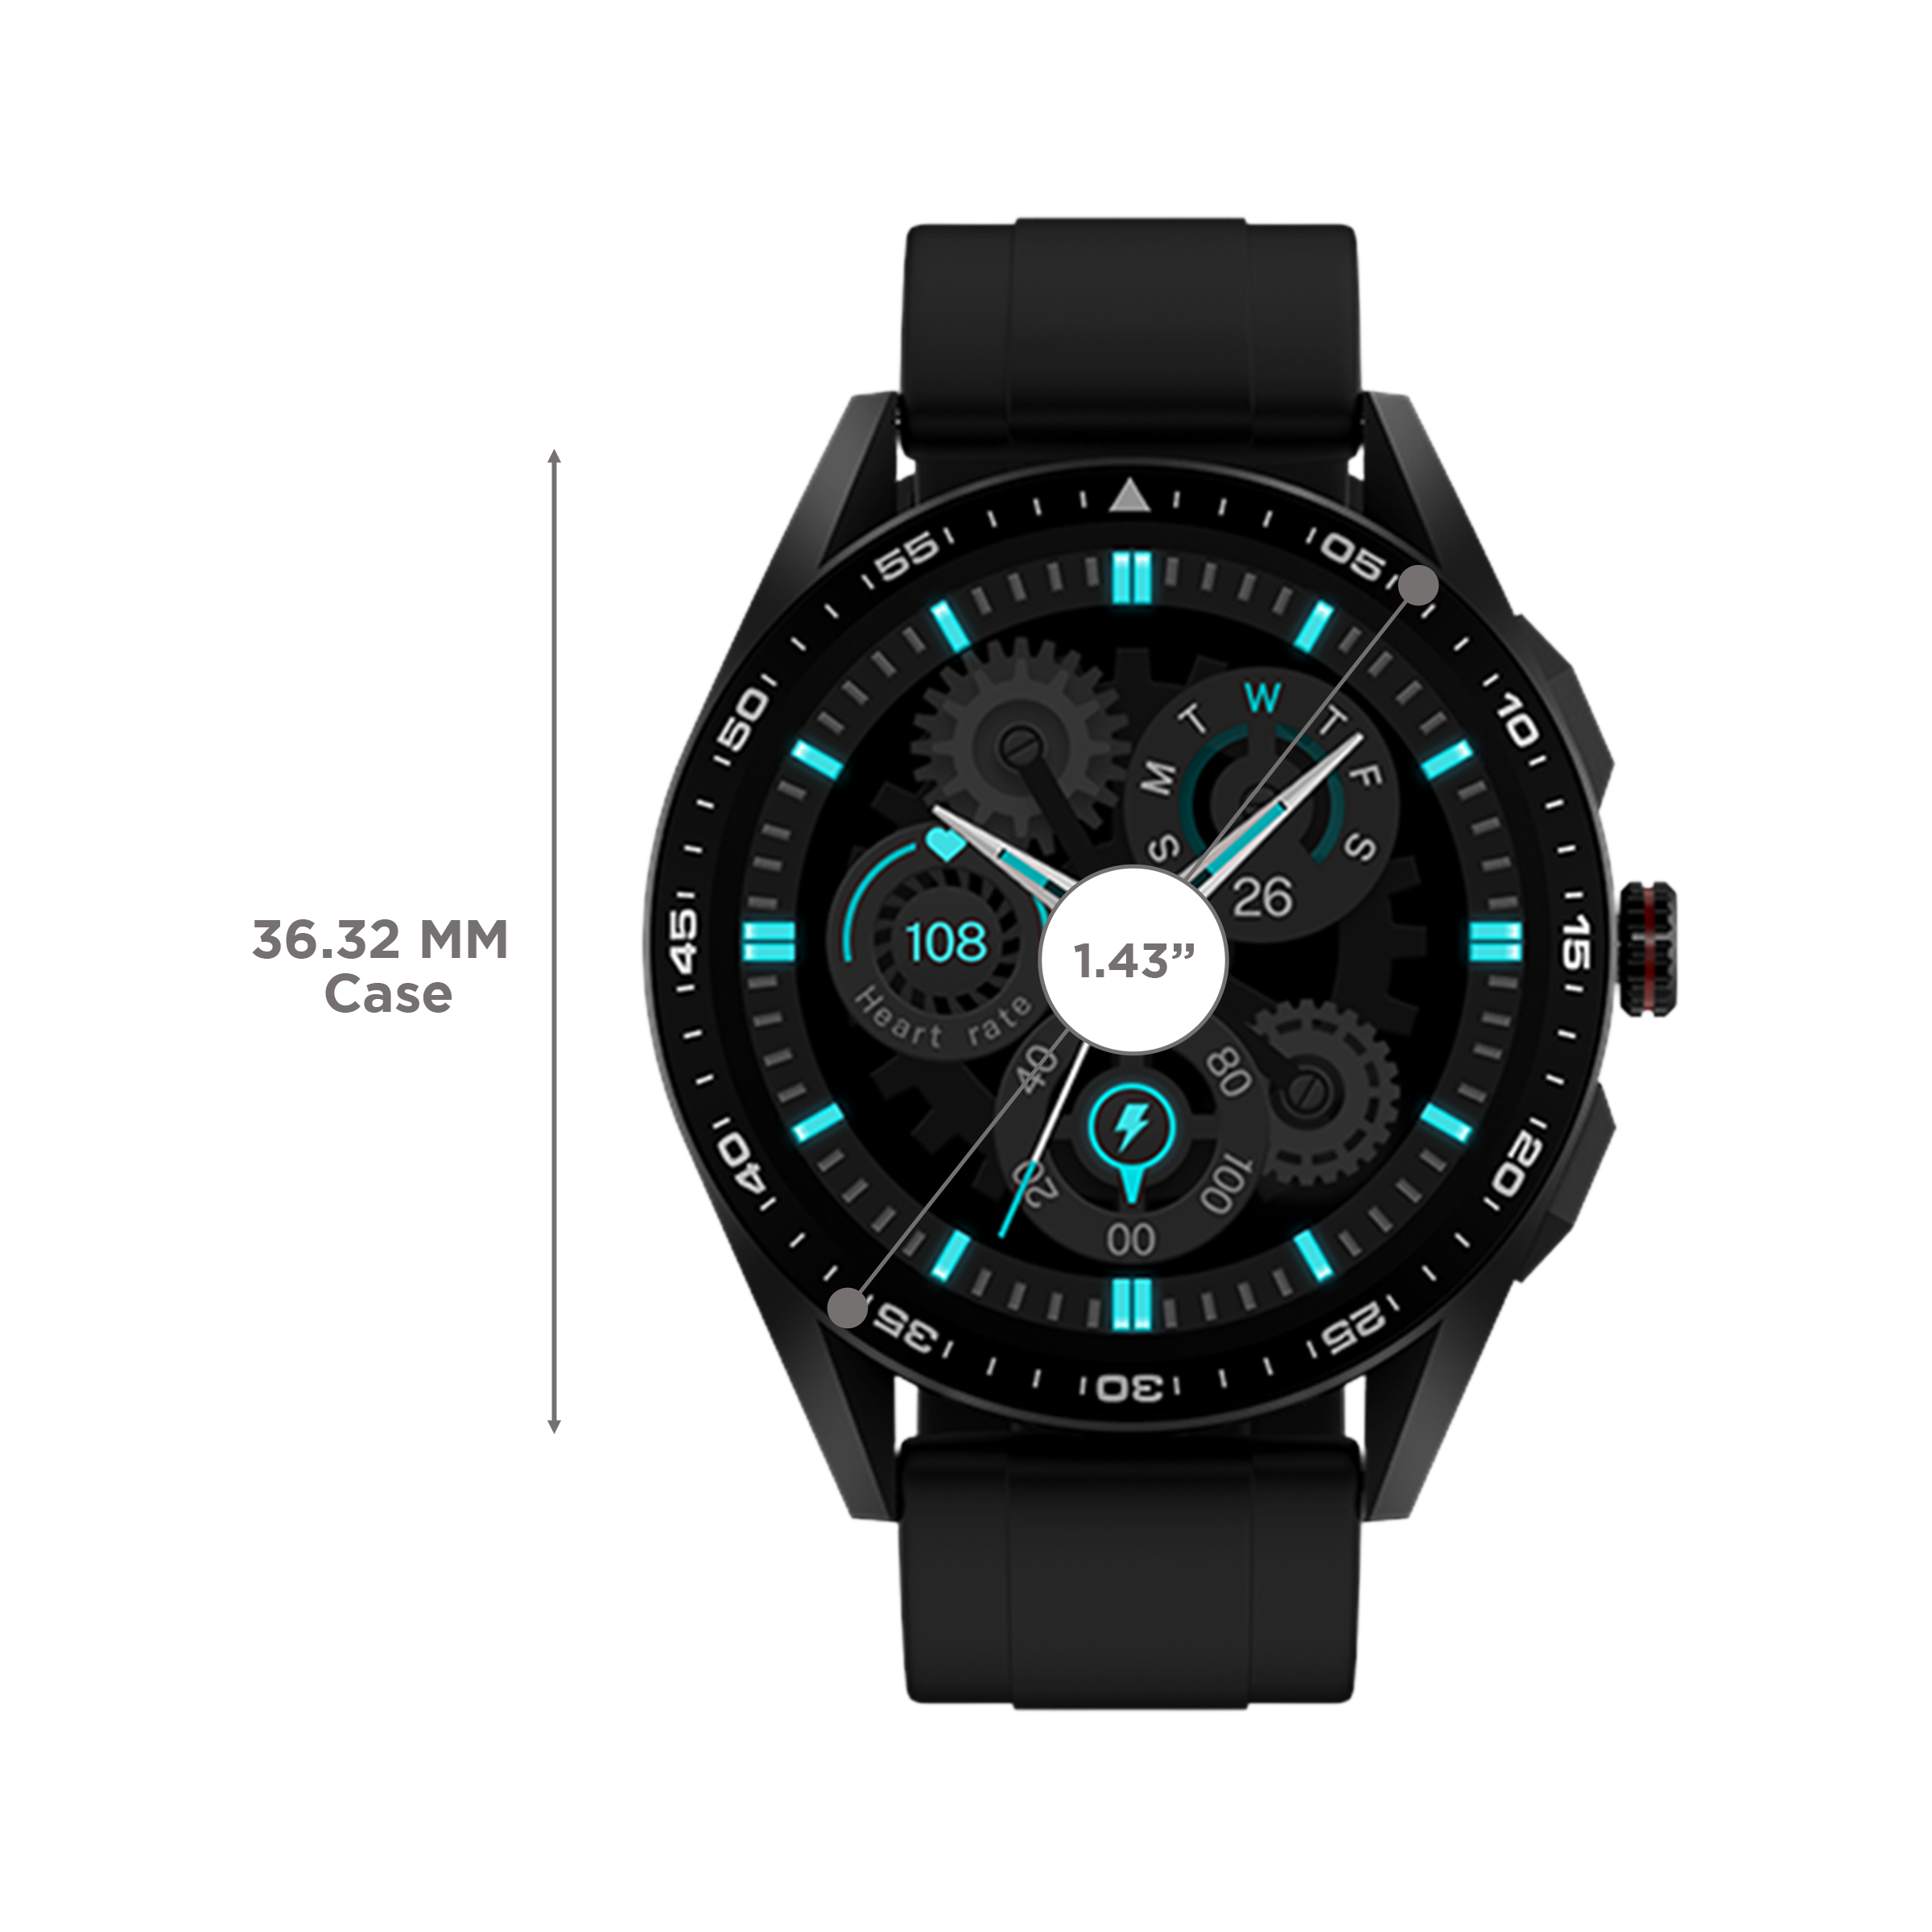 Fire-Boltt Invincible Plus Smartwatch with Bluetooth Calling (36.32mm AMOLED Display, IP67 Water Resistant, Black Strap)_3